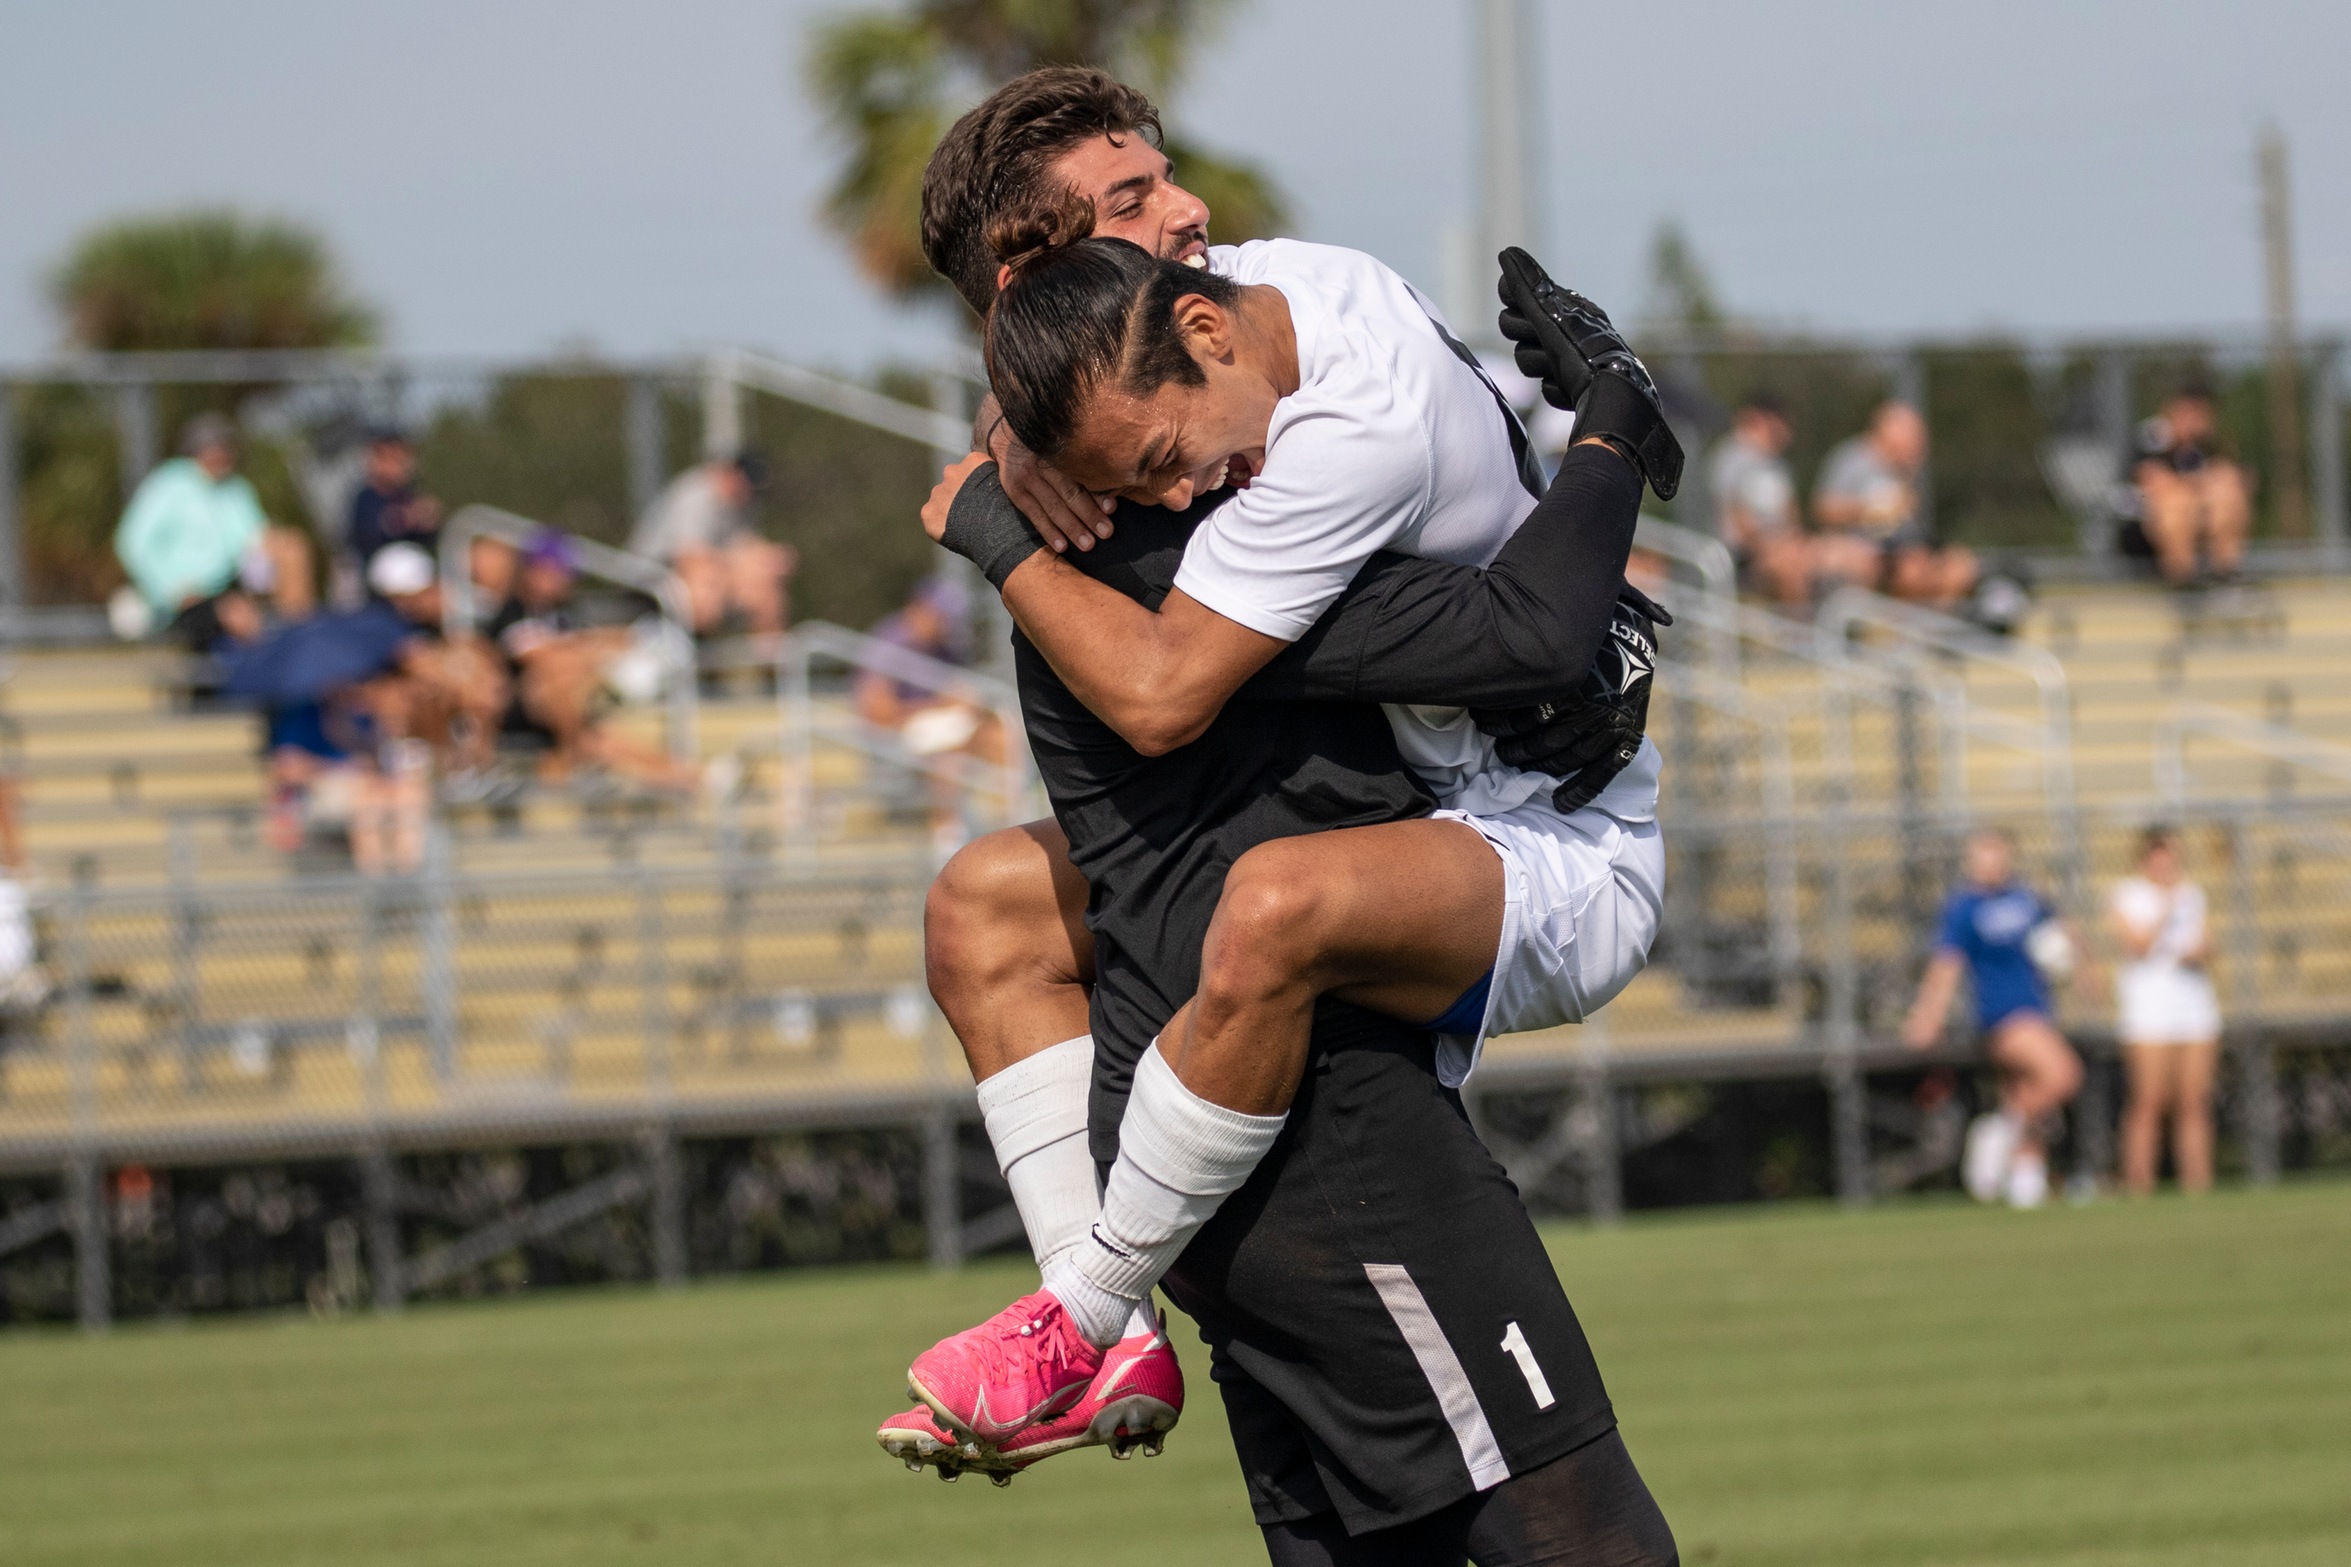 Cowley College tops No. 1 Daytona State, makes semifinals for first time